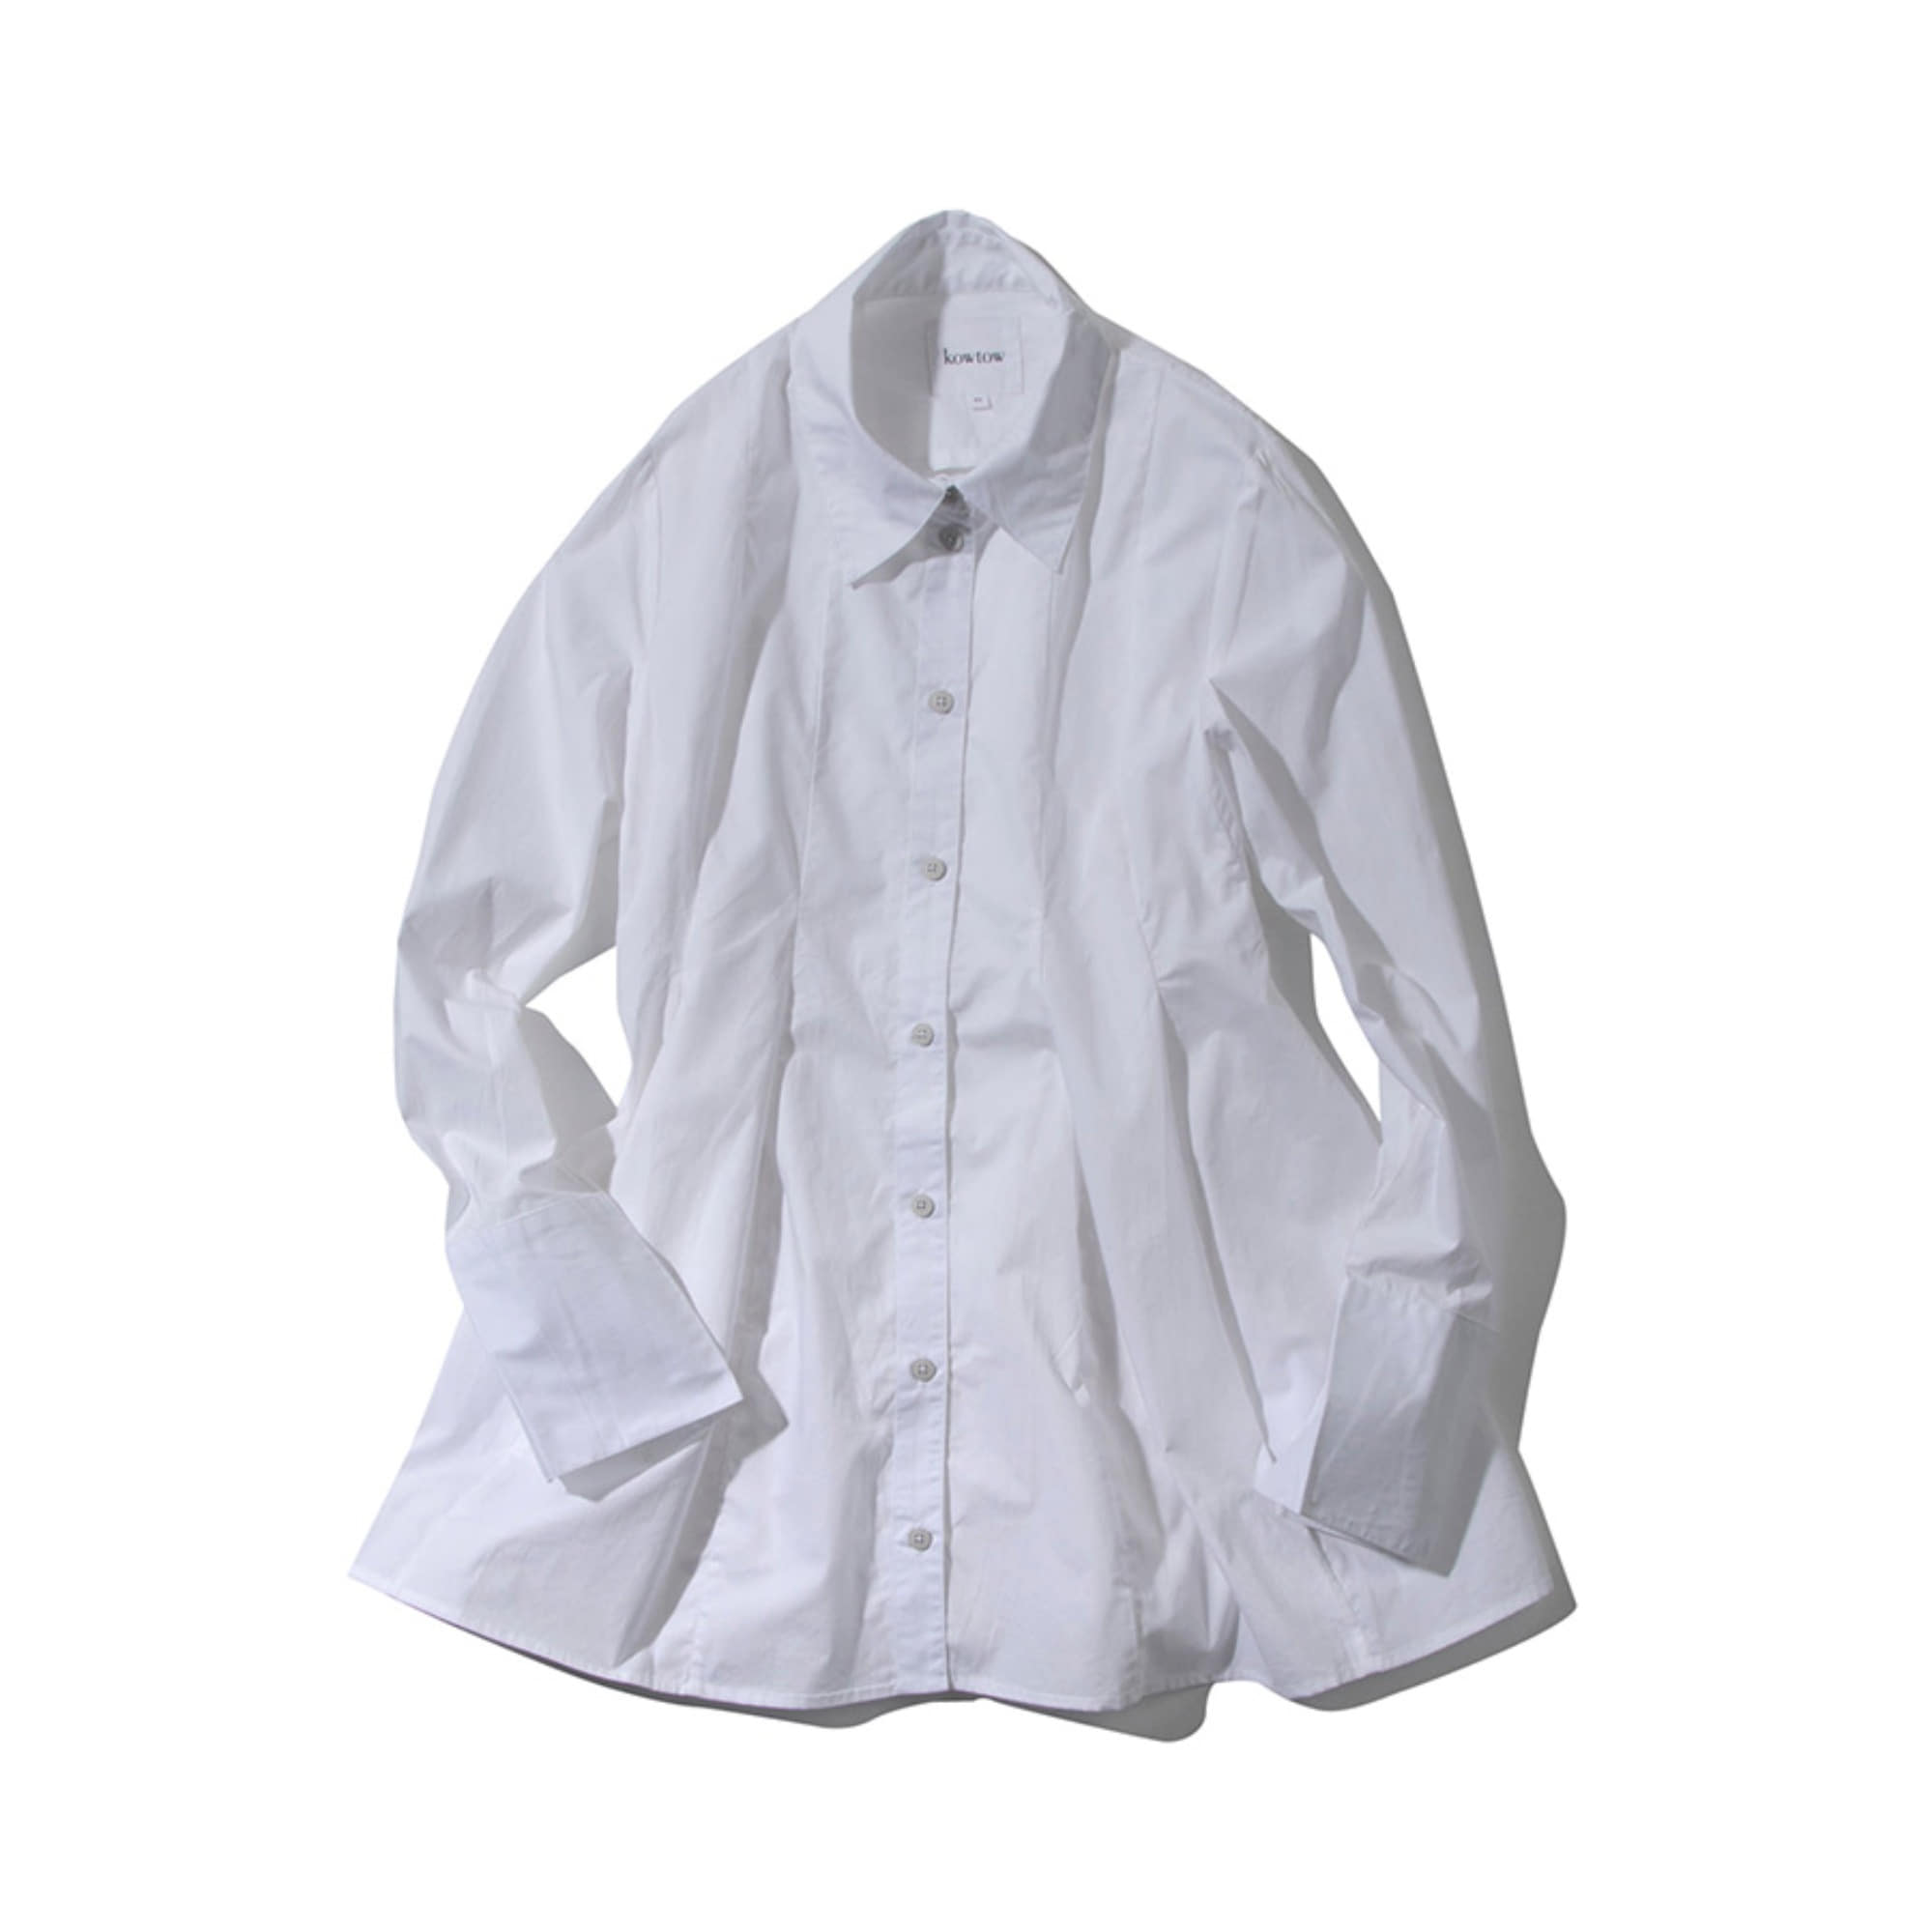 PAGES SHIRT (WHITE)